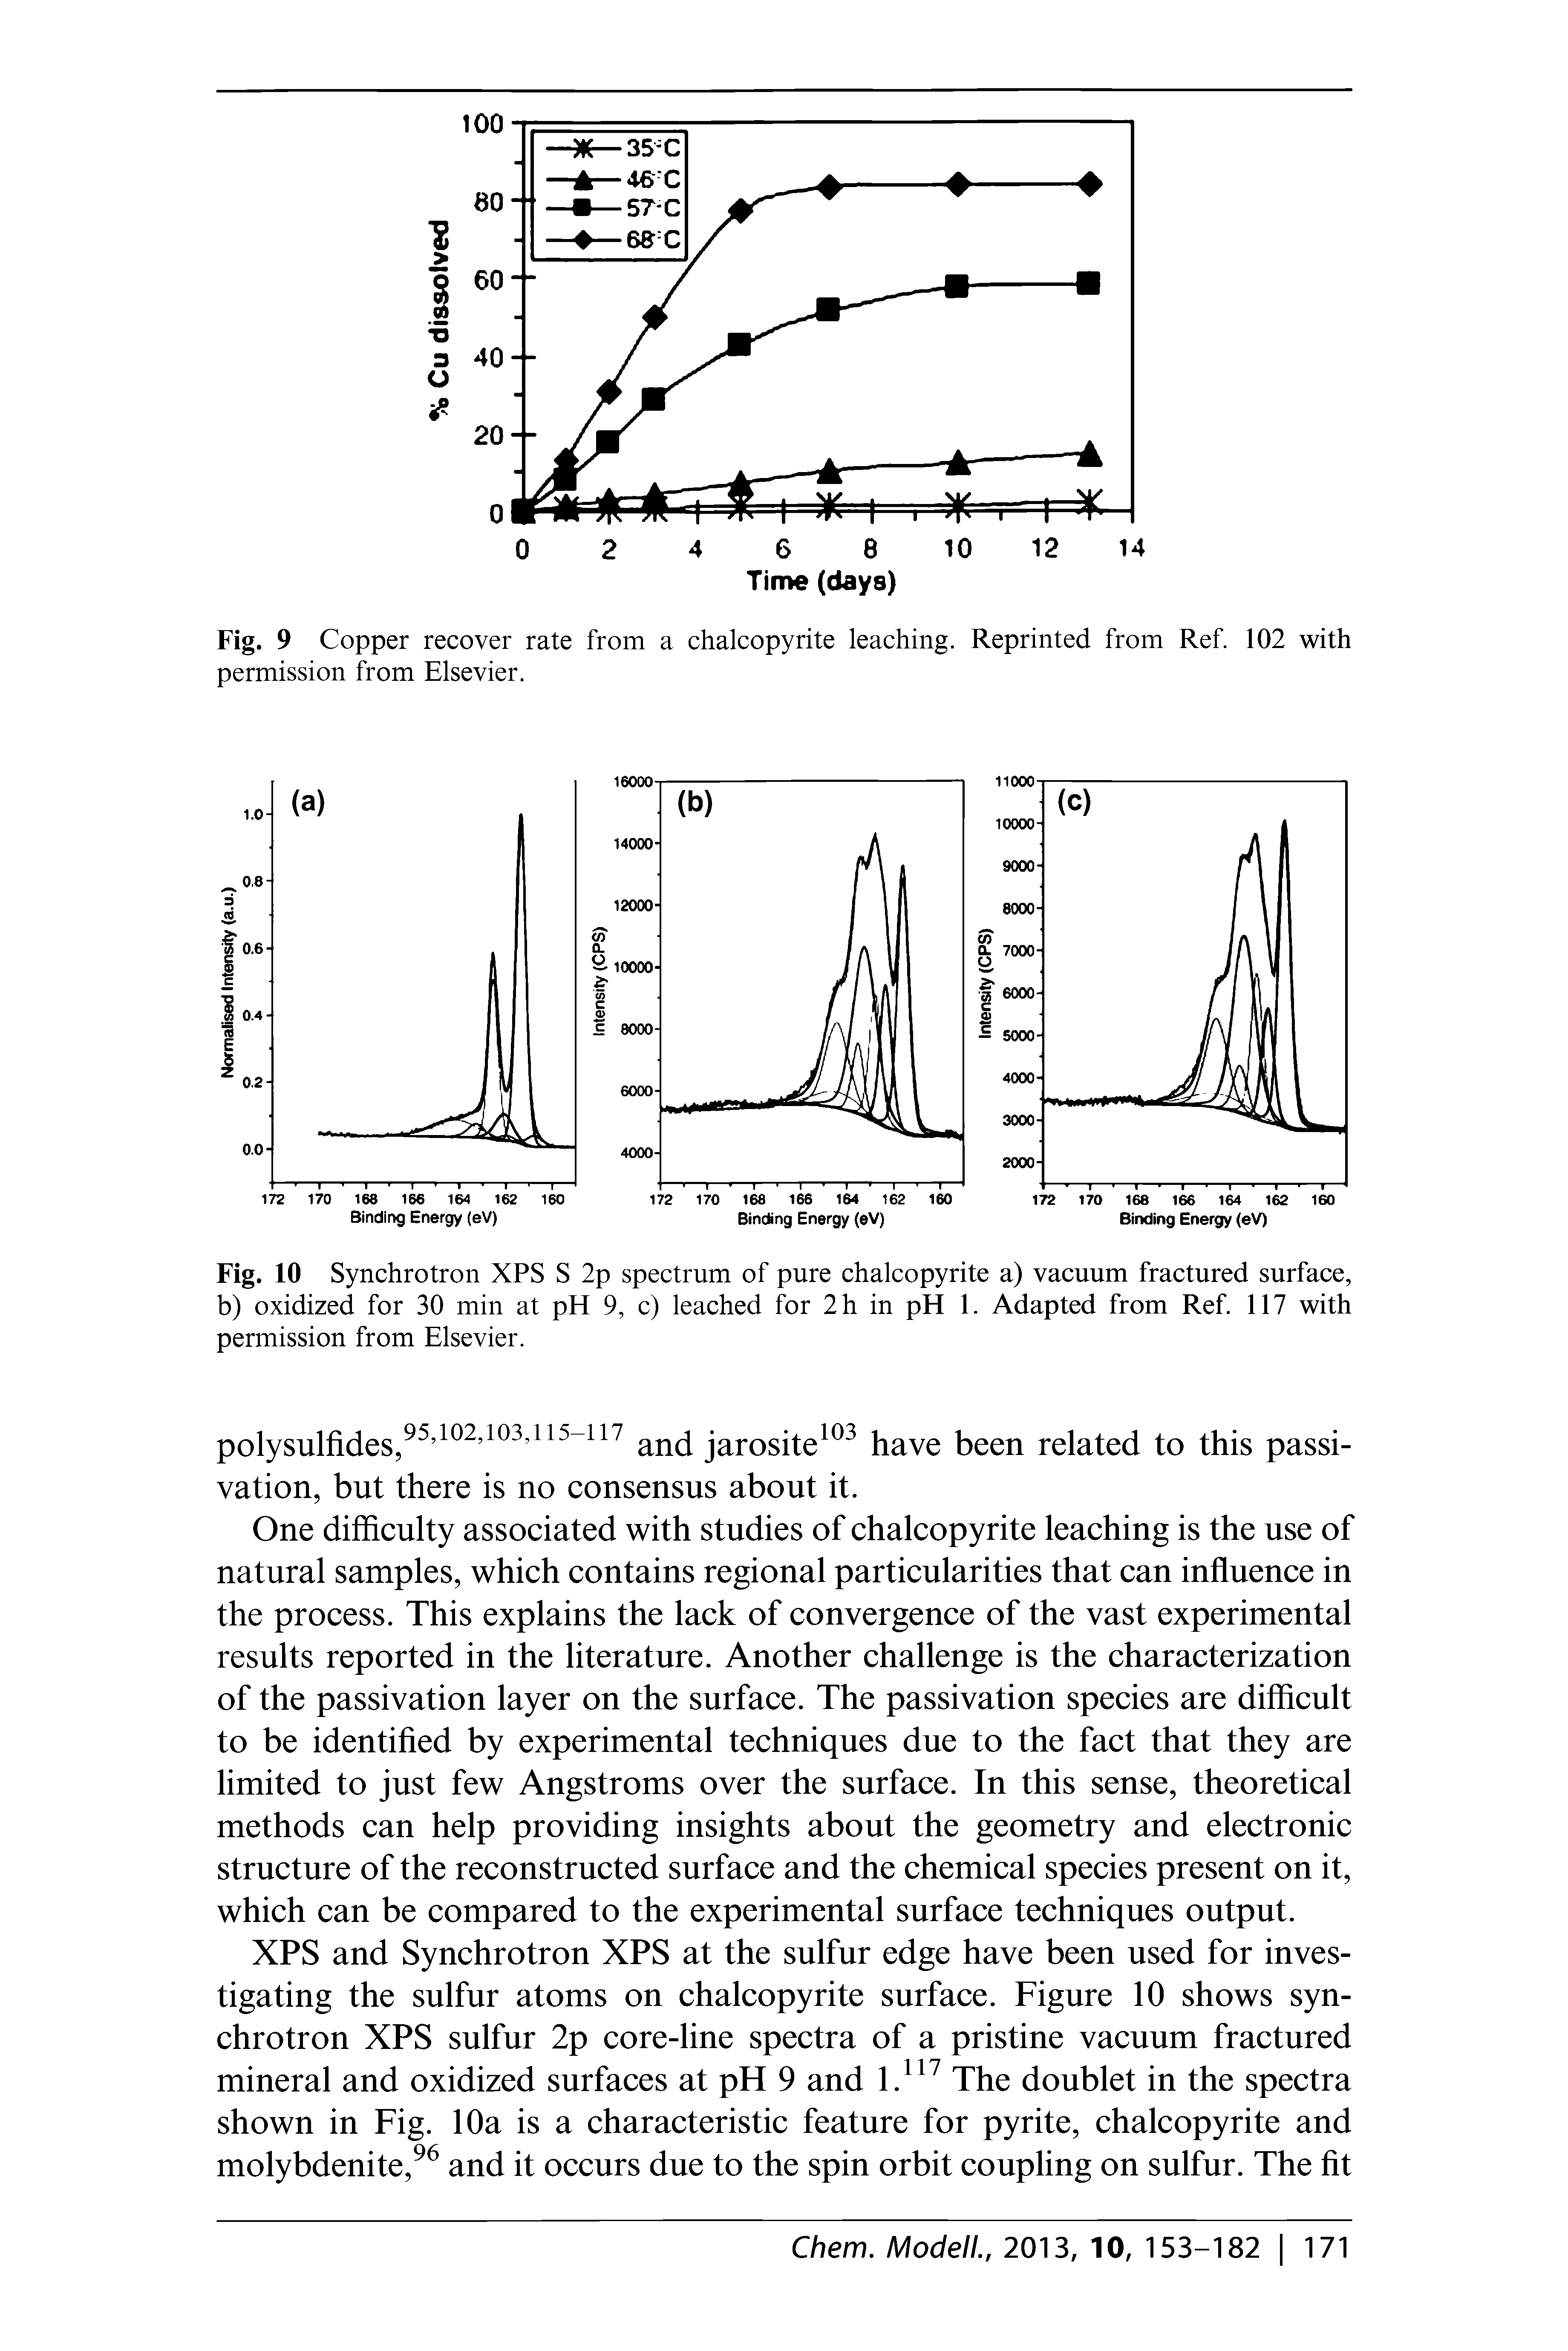 Fig. 9 Copper recover rate from a chalcopyrite leaching. Reprinted from Ref. 102 with permission from Elsevier.